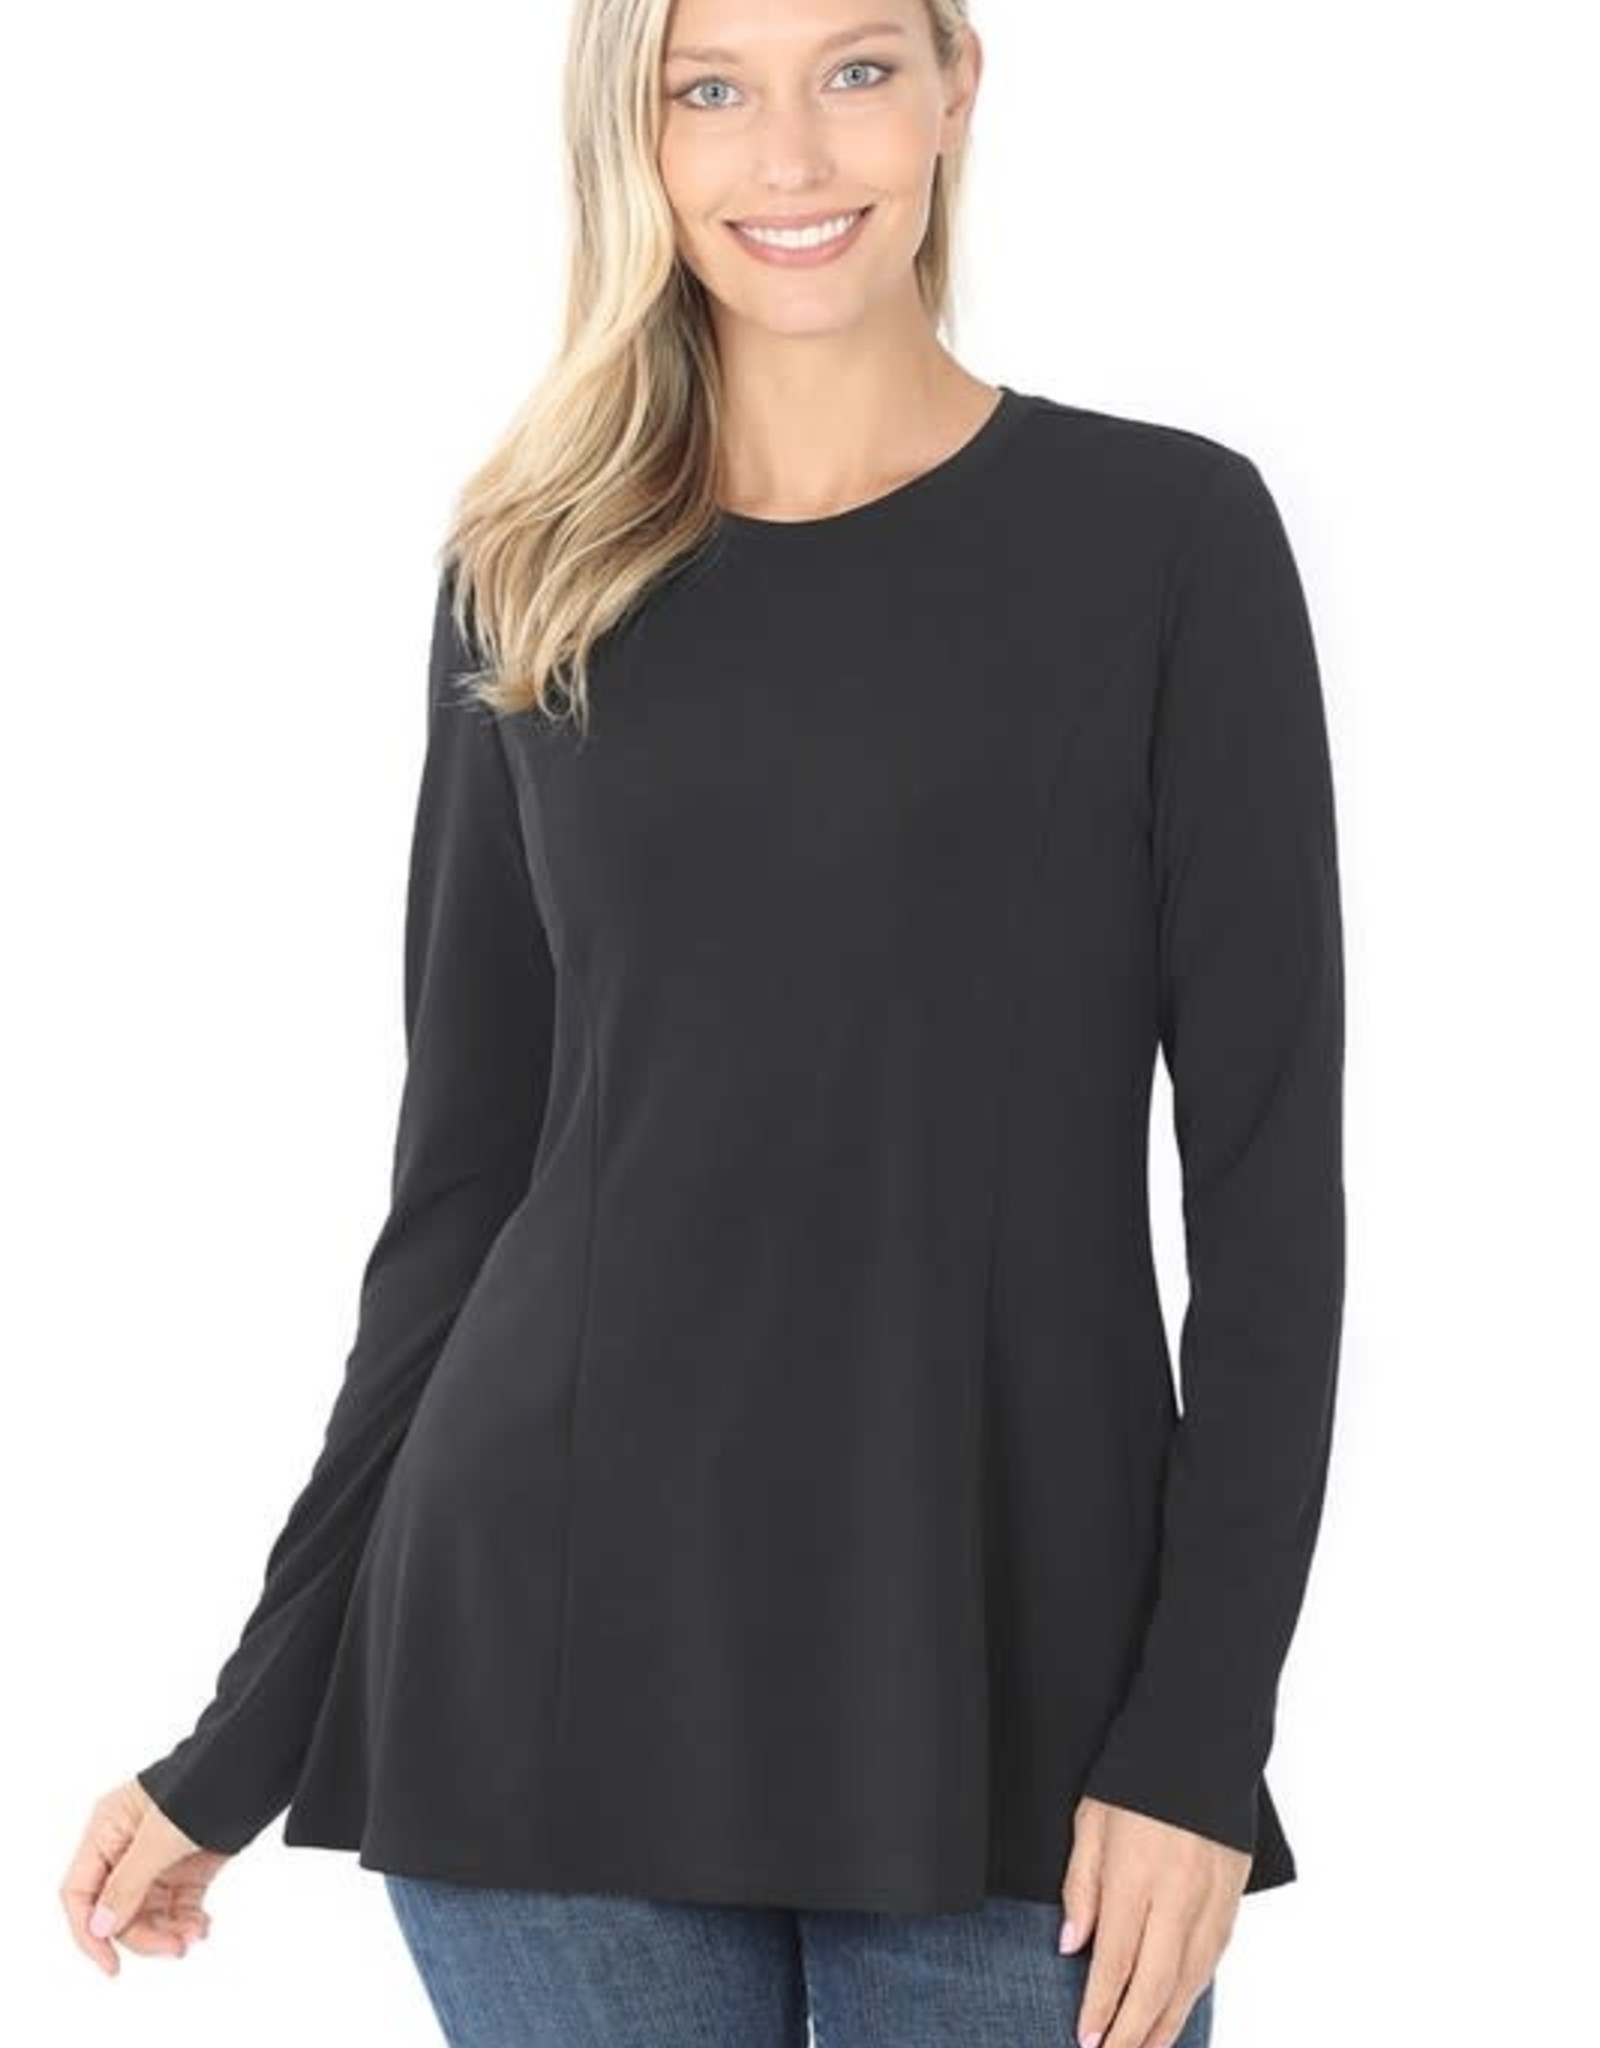 - Black Long Sleeve Round Neck A-Line Top